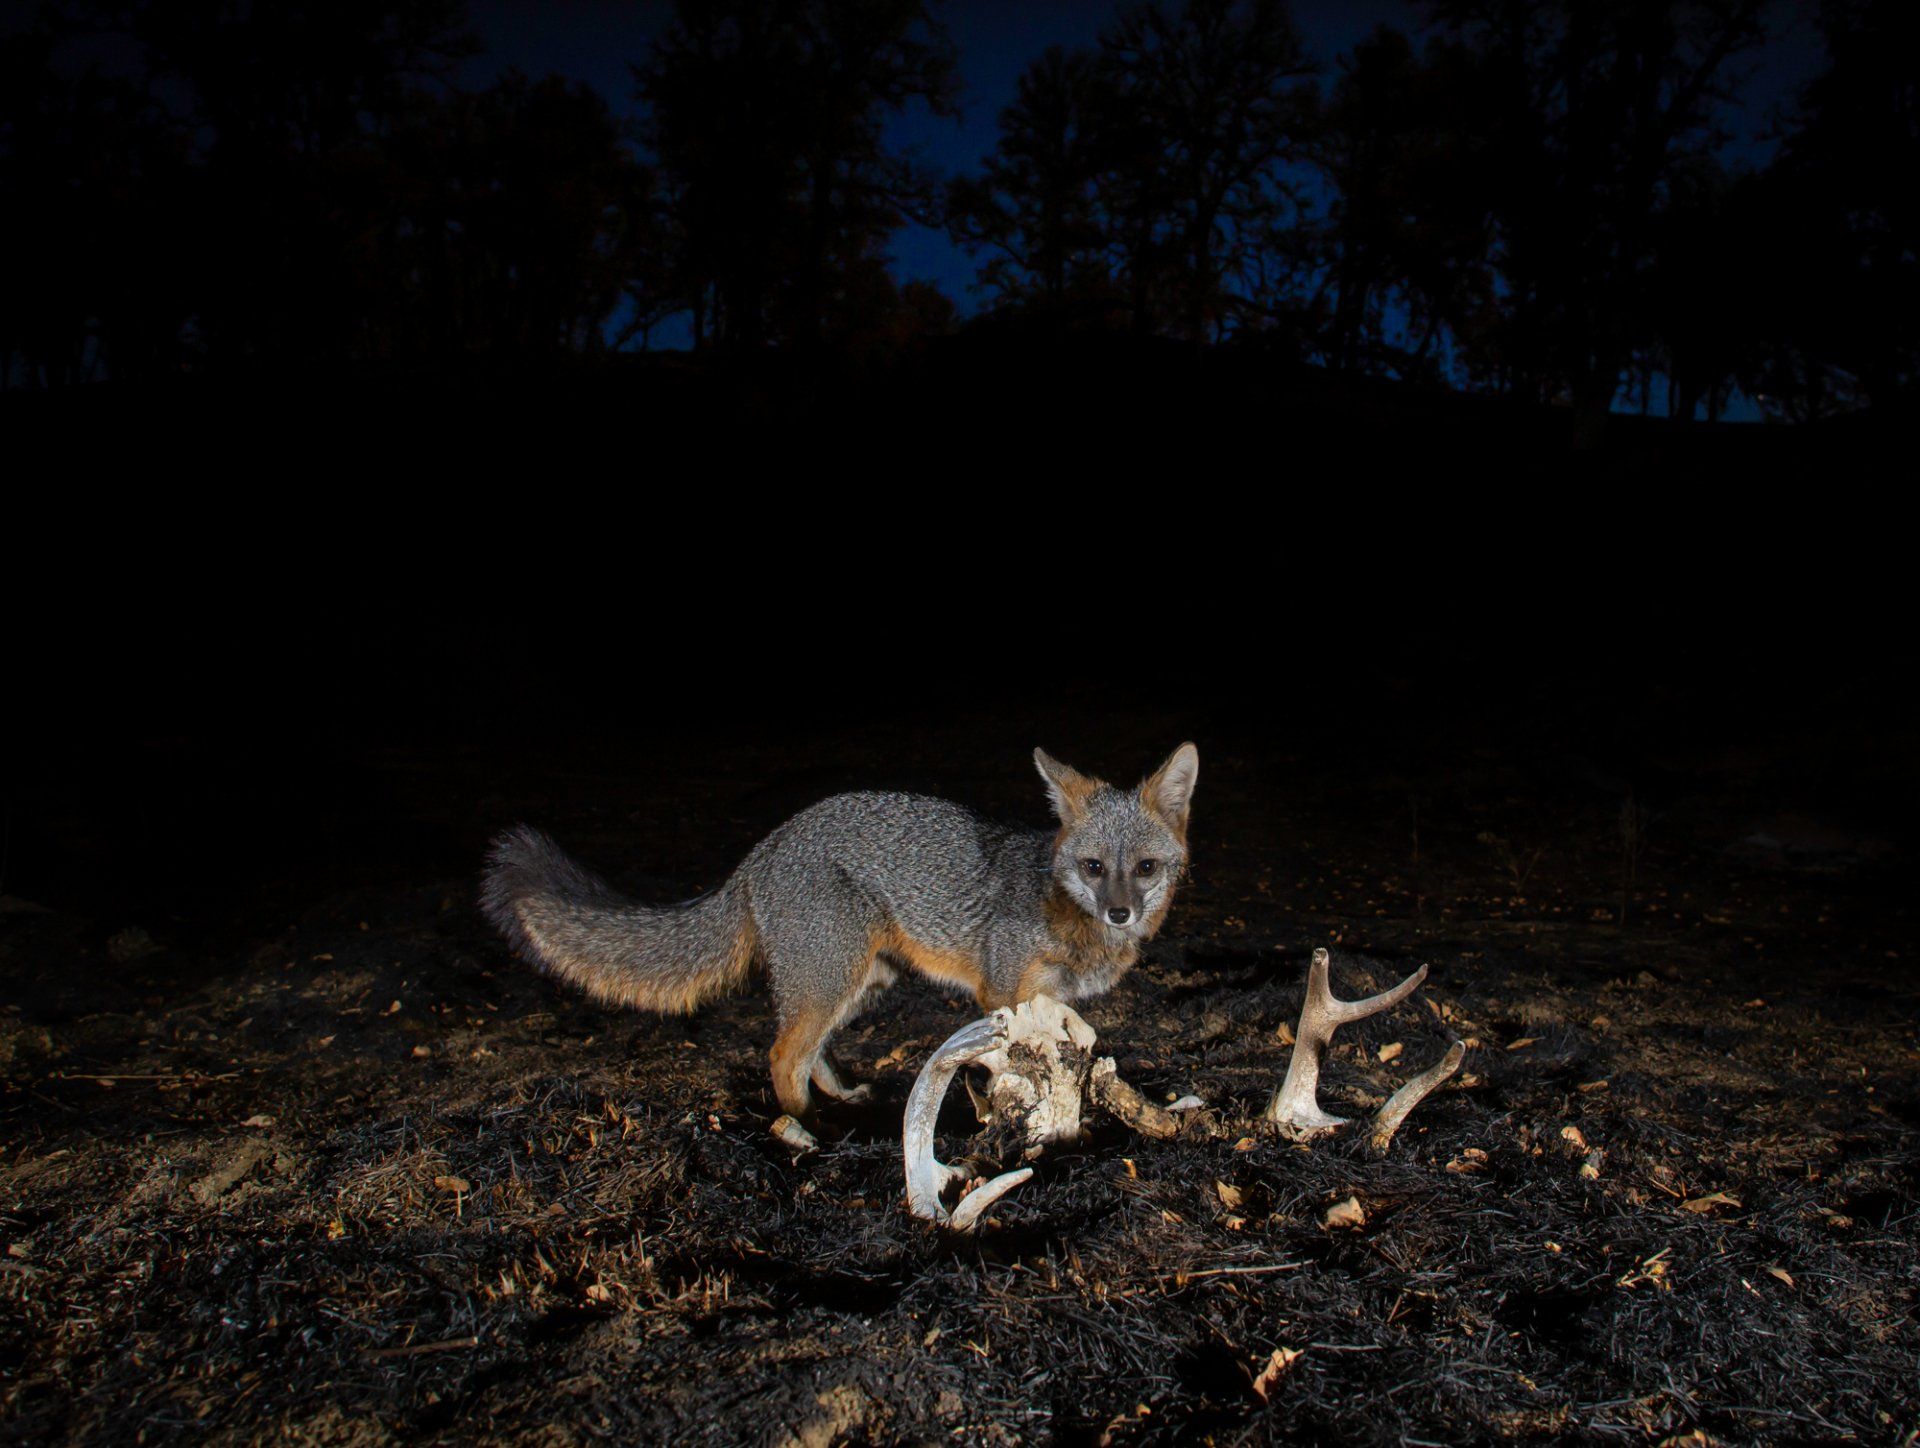 A gray fox investigates an old skull after a wildfire.